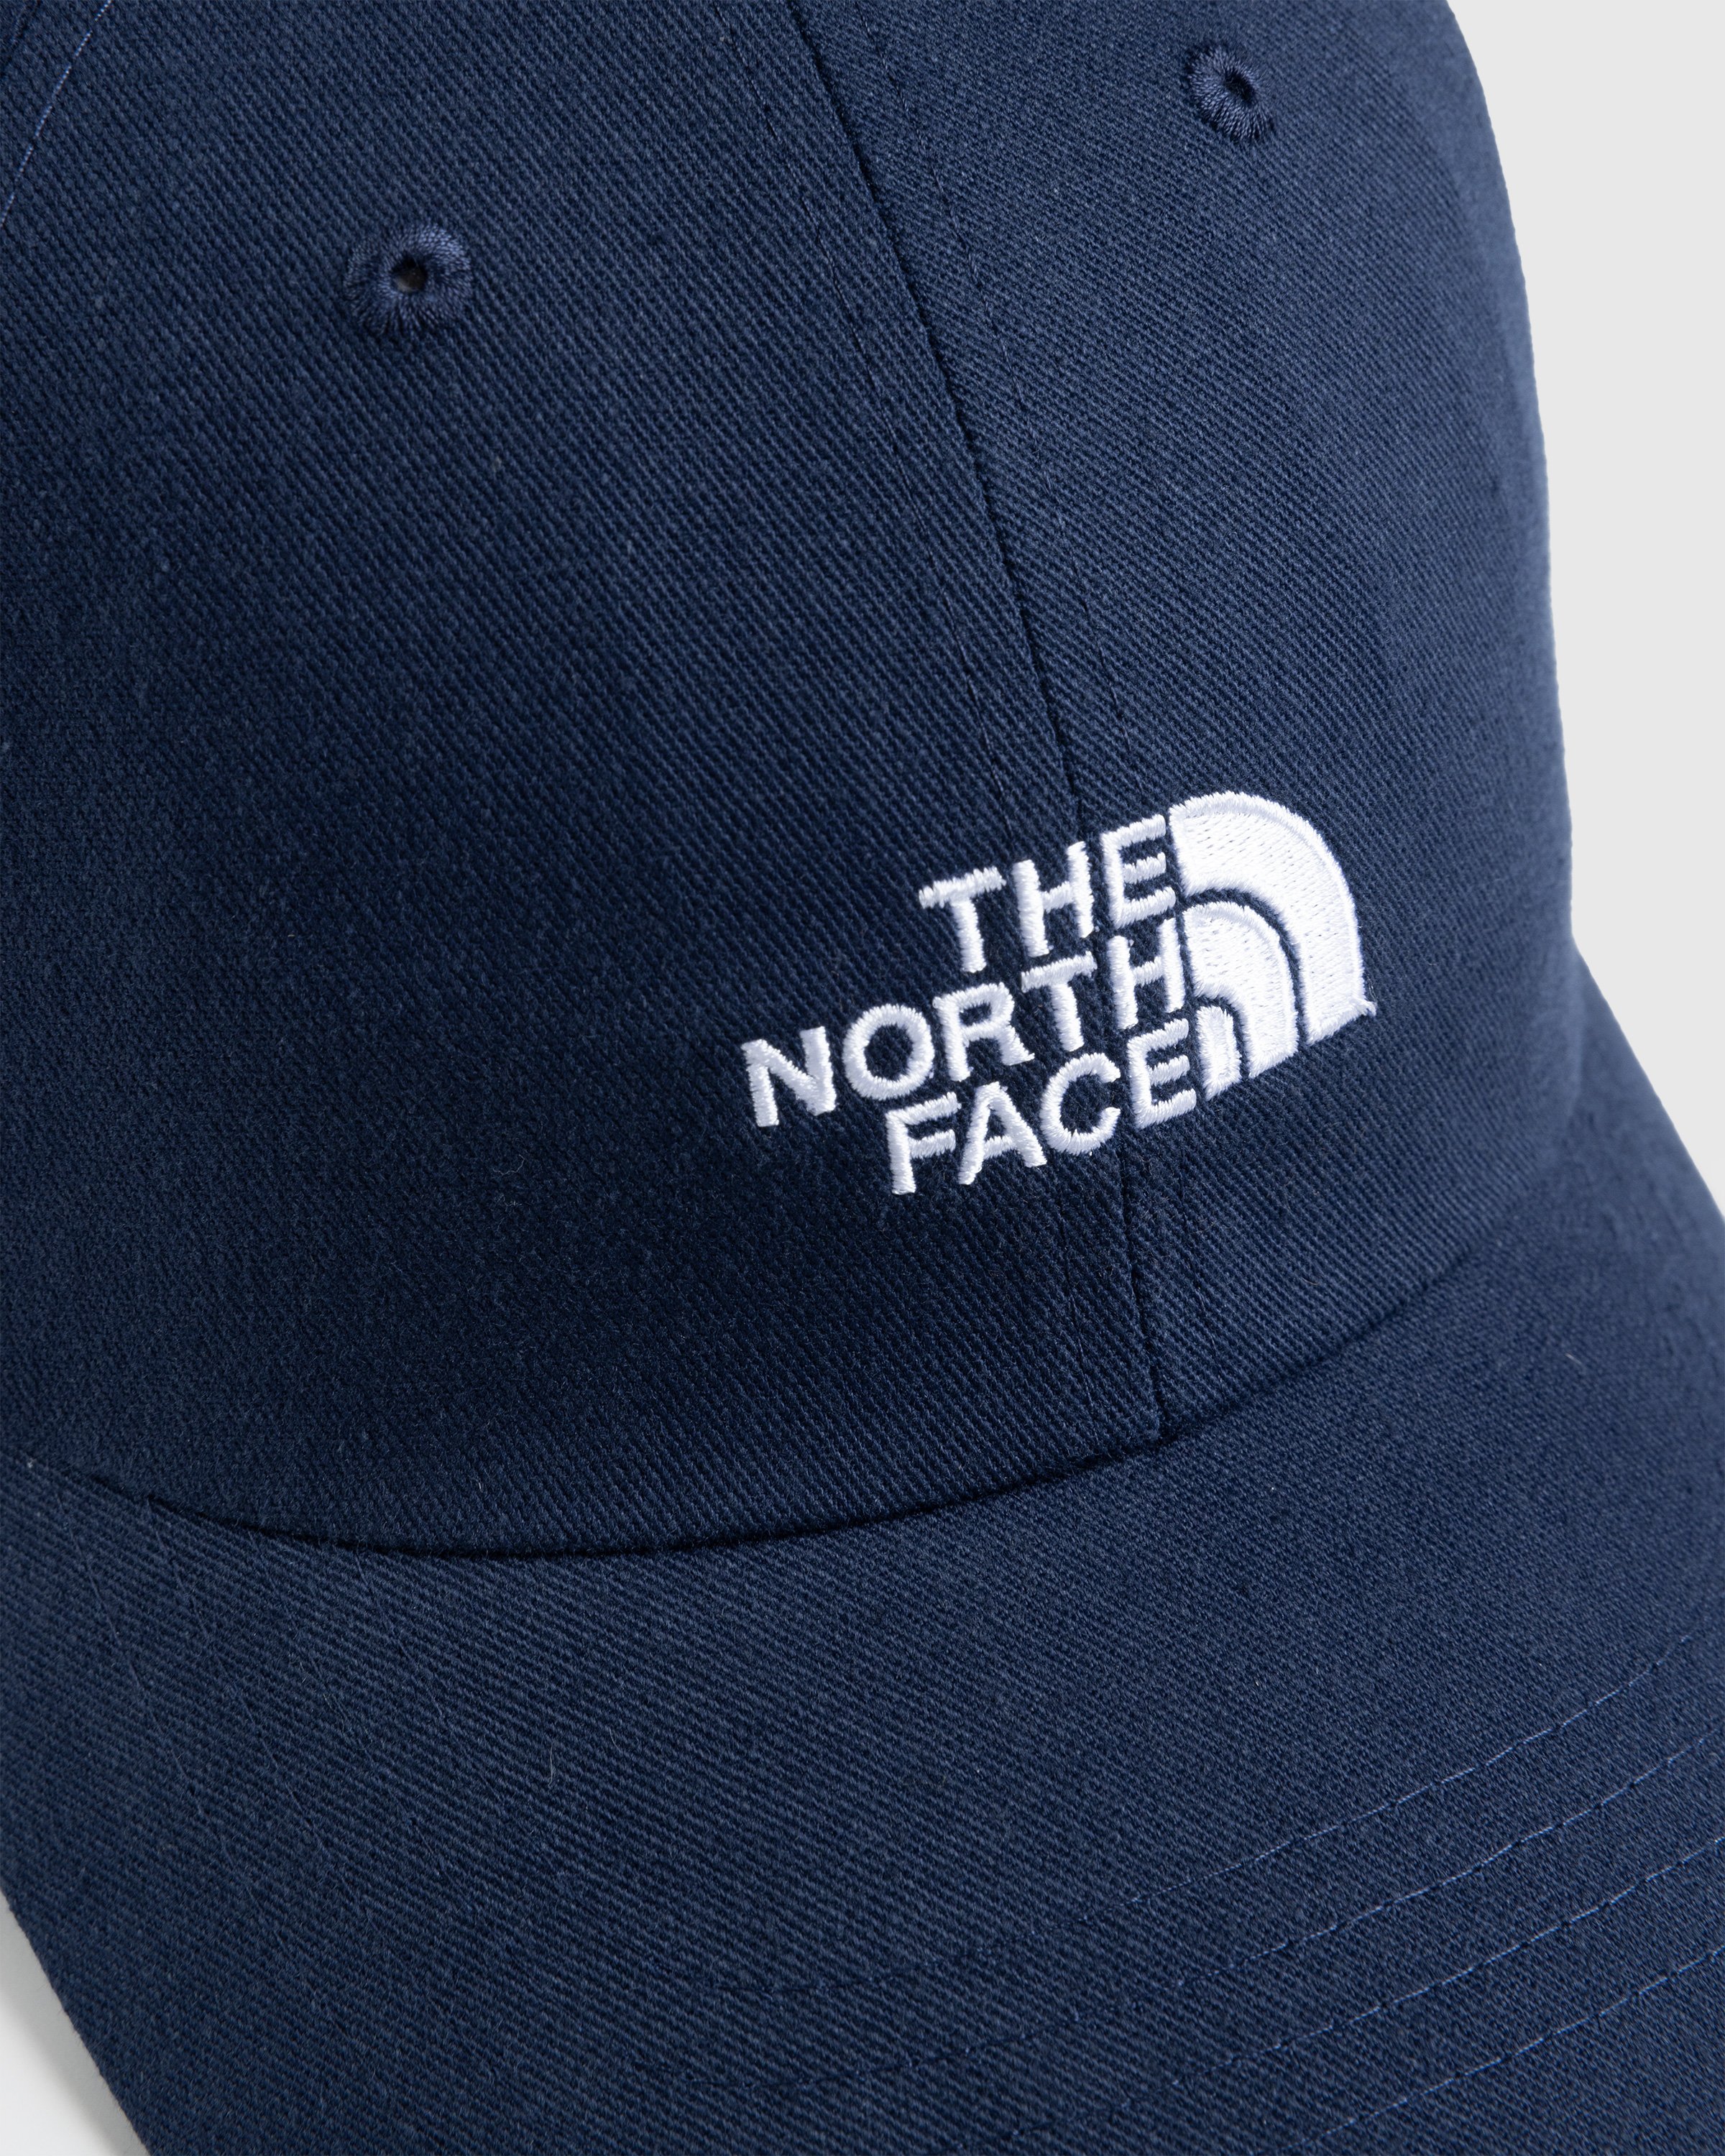 The North Face - NORM HAT SUMMIT NAVY - Accessories - Blue - Image 6